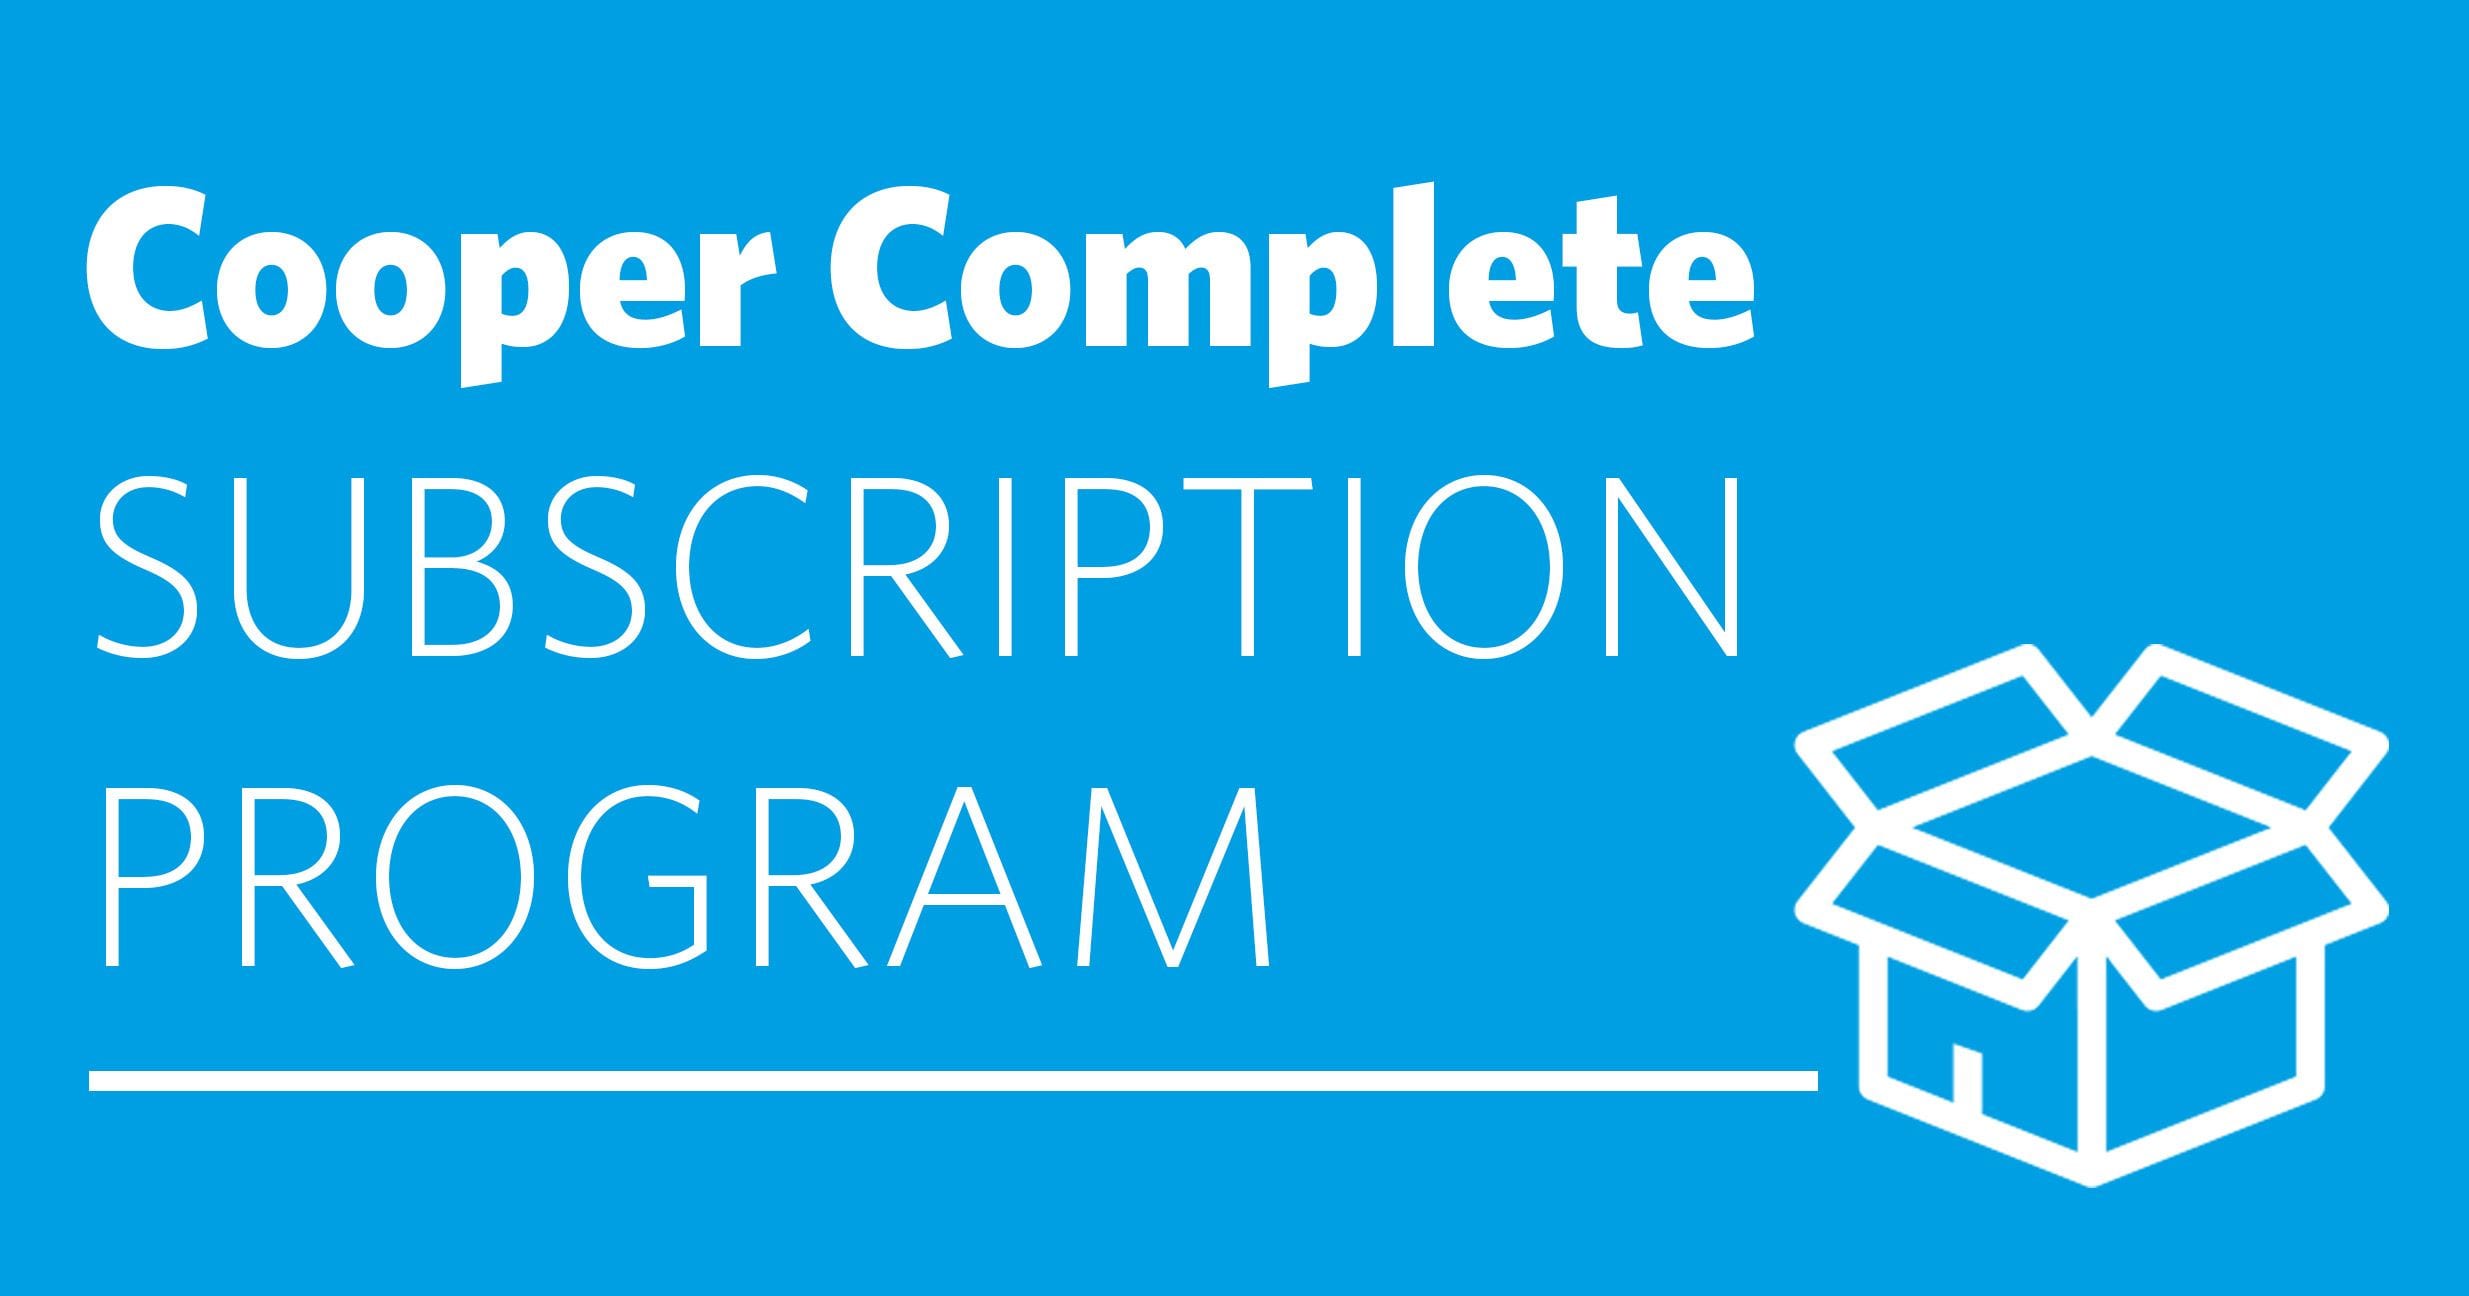 subscription program by cooper complete